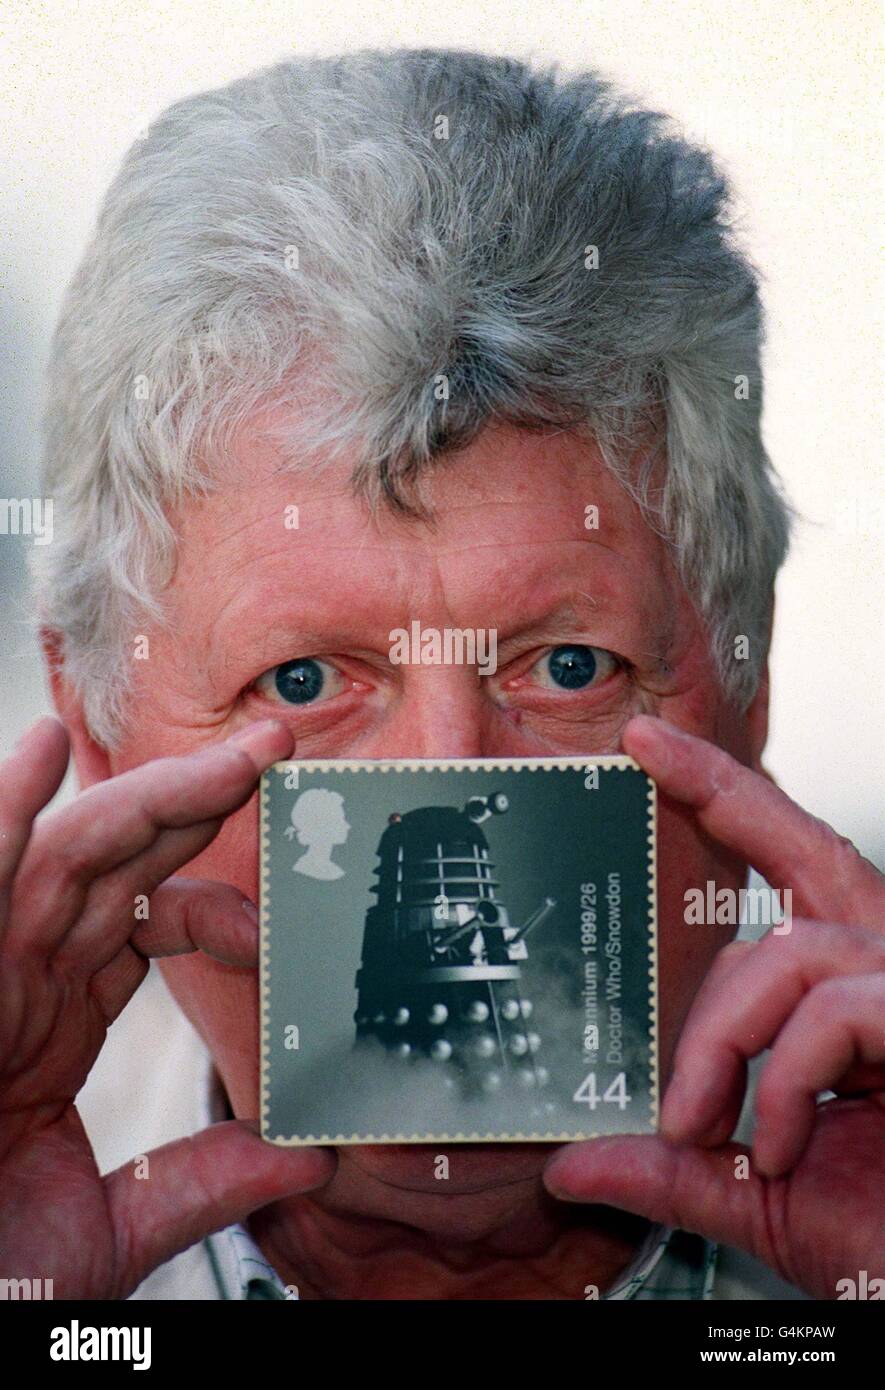 Tom Baker, who played Dr Who in the BBC TV series, opens a new autograph gallery at the Strand Stamp Centre, London. Baker added his signature to a Dalek stamp that has been issued by the Royal Mail, as part of the Entertainers' tale series. Stock Photo